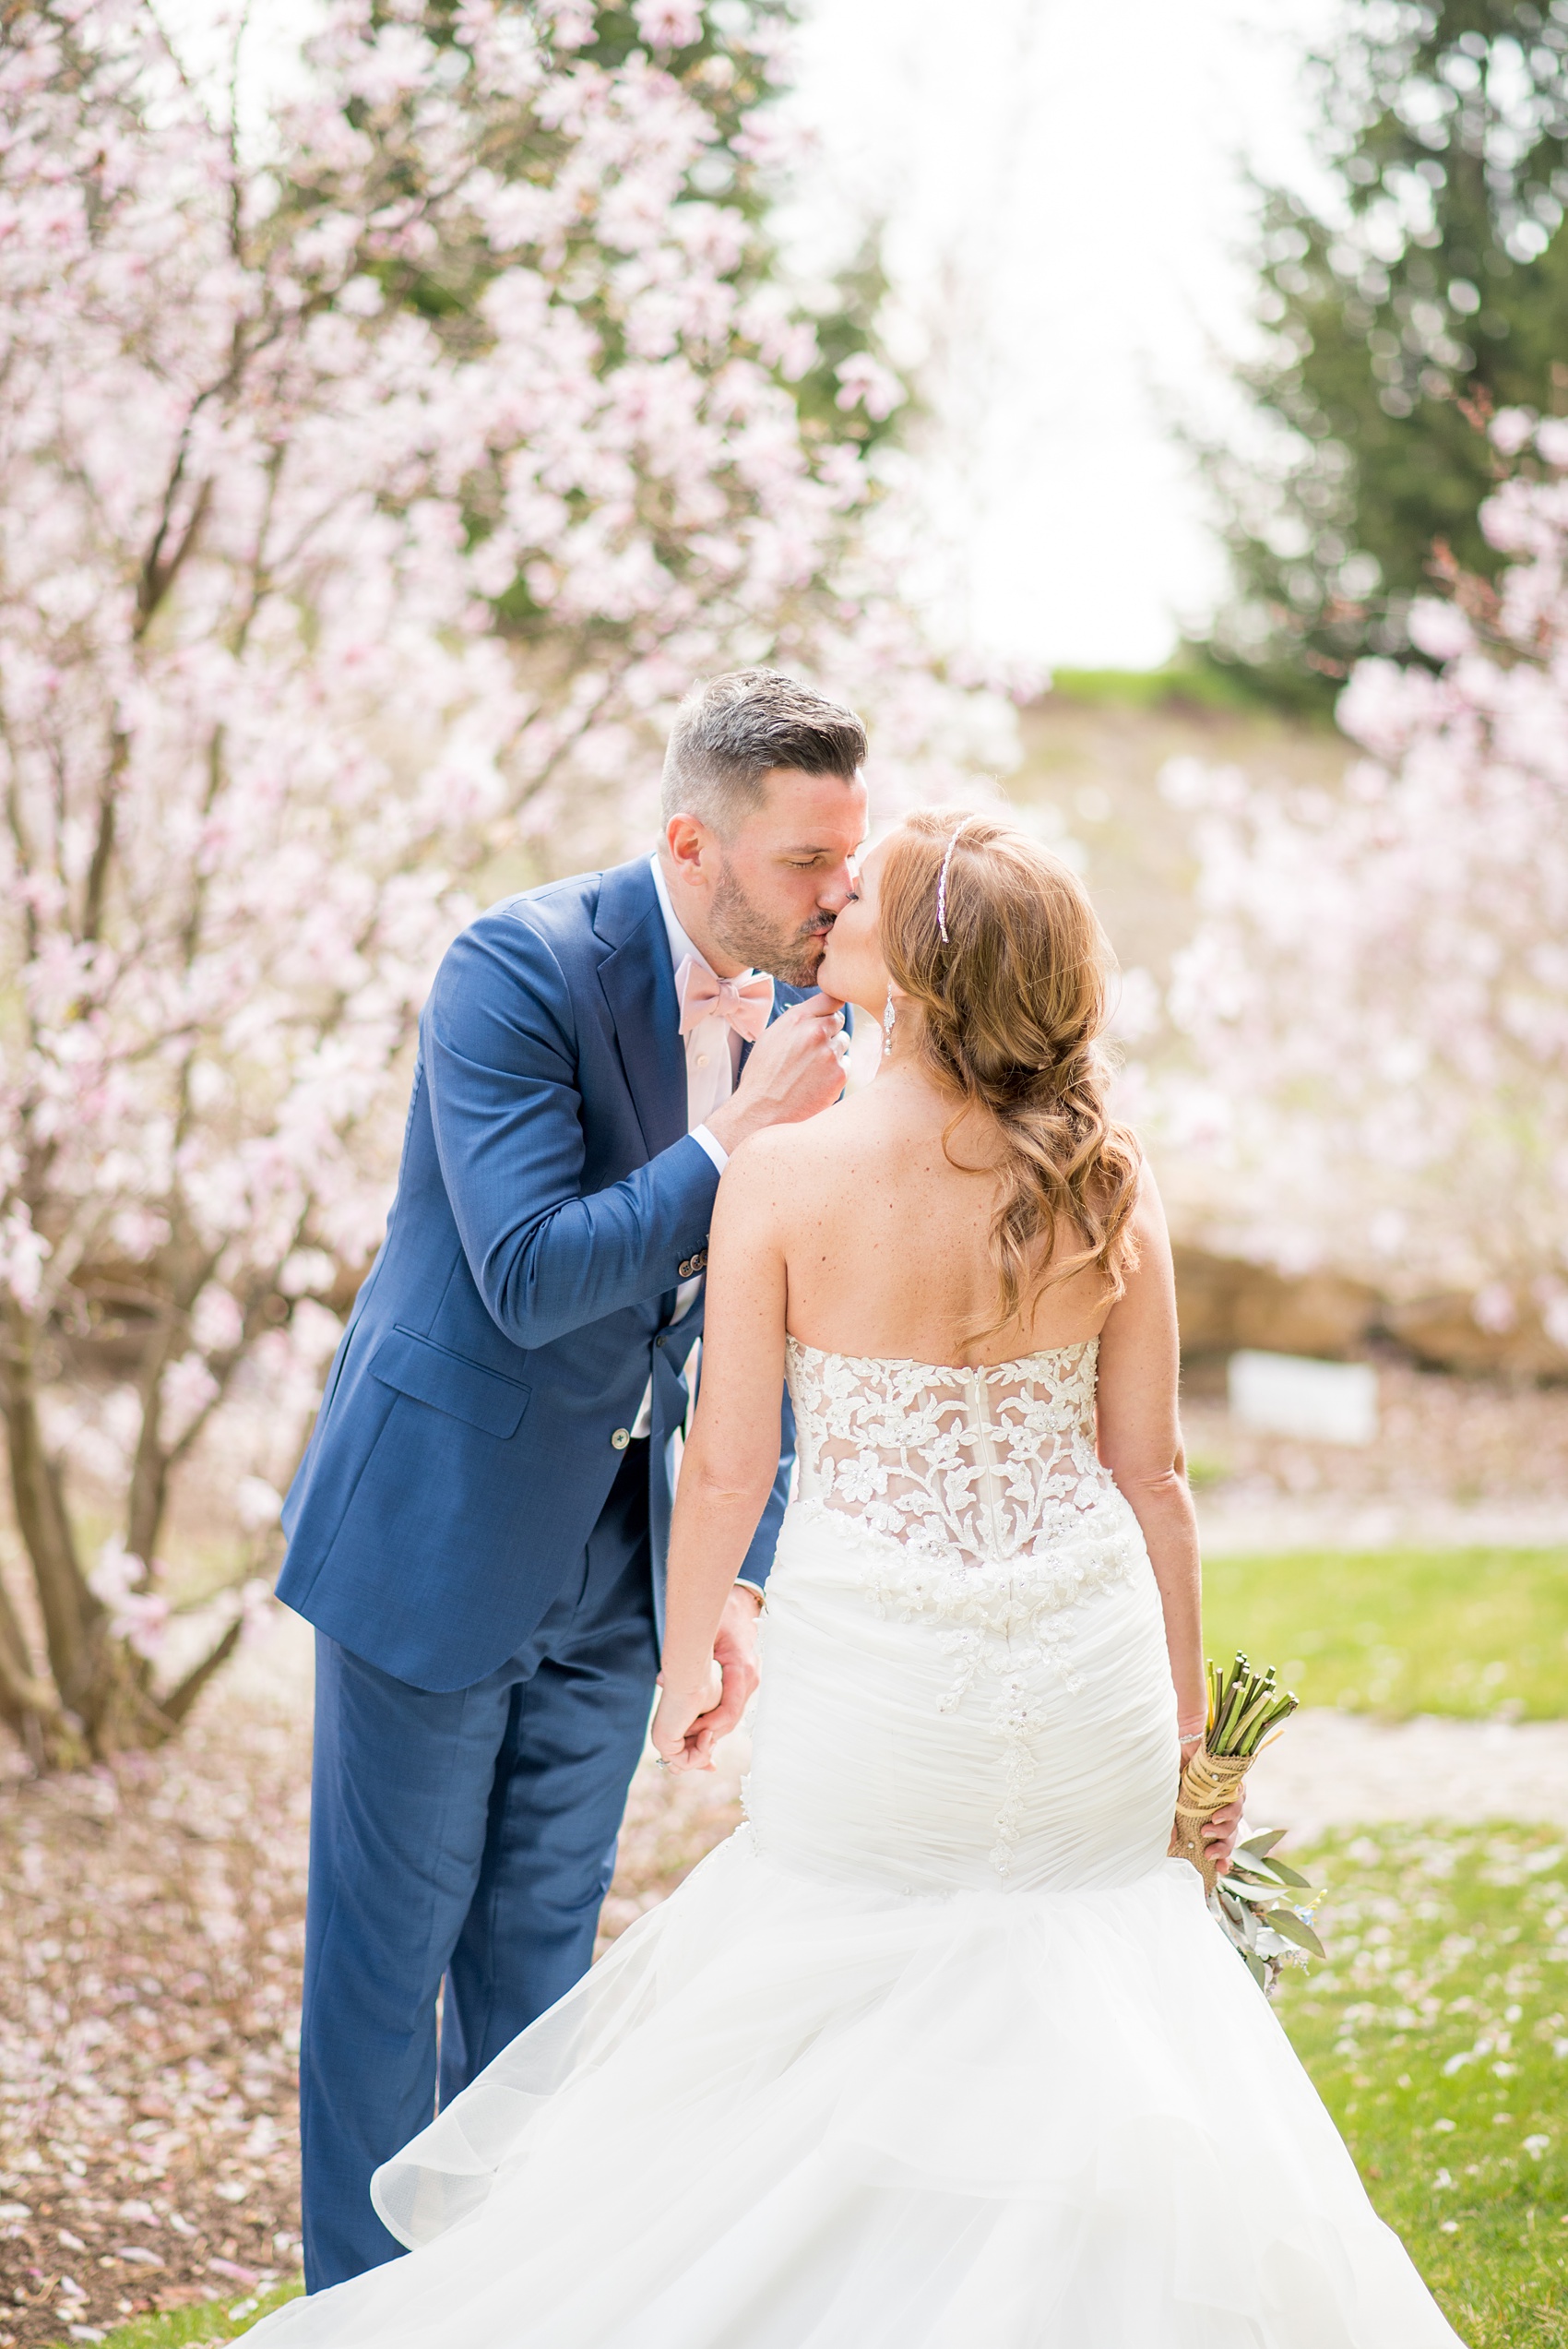 Crystal Springs Resort wedding photos in New Jersey, with photographer Mikkel Paige Photography. The couple’s spring wedding had an outdoor ceremony with photos at this rustic, woodsy venue showing their blue and pink palette decor from getting ready to their reception. This picture shows the groom in a custom navy blue suit and pink bow tie gently kissing his bride, in her lace gown, amongst the cherry blossoms. Click through to see their complete wedding recap! #NewJerseywedding #MikkelPaige #NJweddingphotographer #NJphotographer #brideandgroom #springwedding